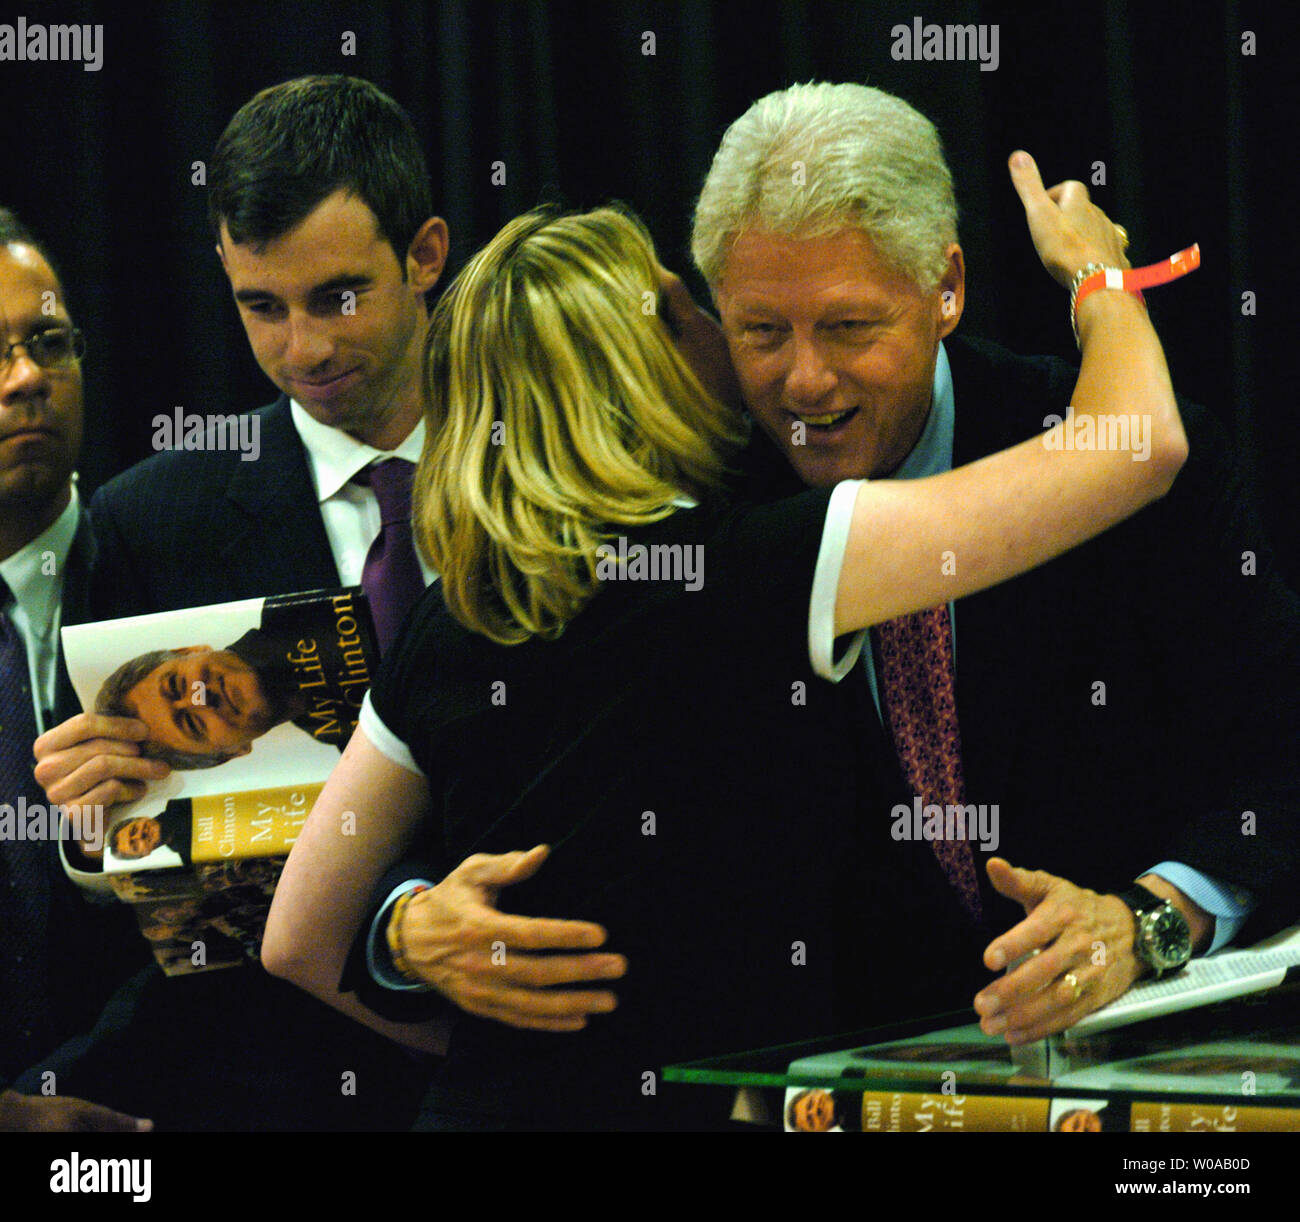 Former U.S. President Bill Clinton gets a hug and a kiss from Pavla Vltavska at a book-signing session organized by Indigo Bookstore in Toronto, Canada on August 5, 2004. Clinton made his only Canadian stop to promote his book 'My Life' and signed copies of it for about 1000 people for over 3 hours in the store before going outside to sign more for the hundreds gathered on the street. (UPI Photo/Christine Chew) Stock Photo